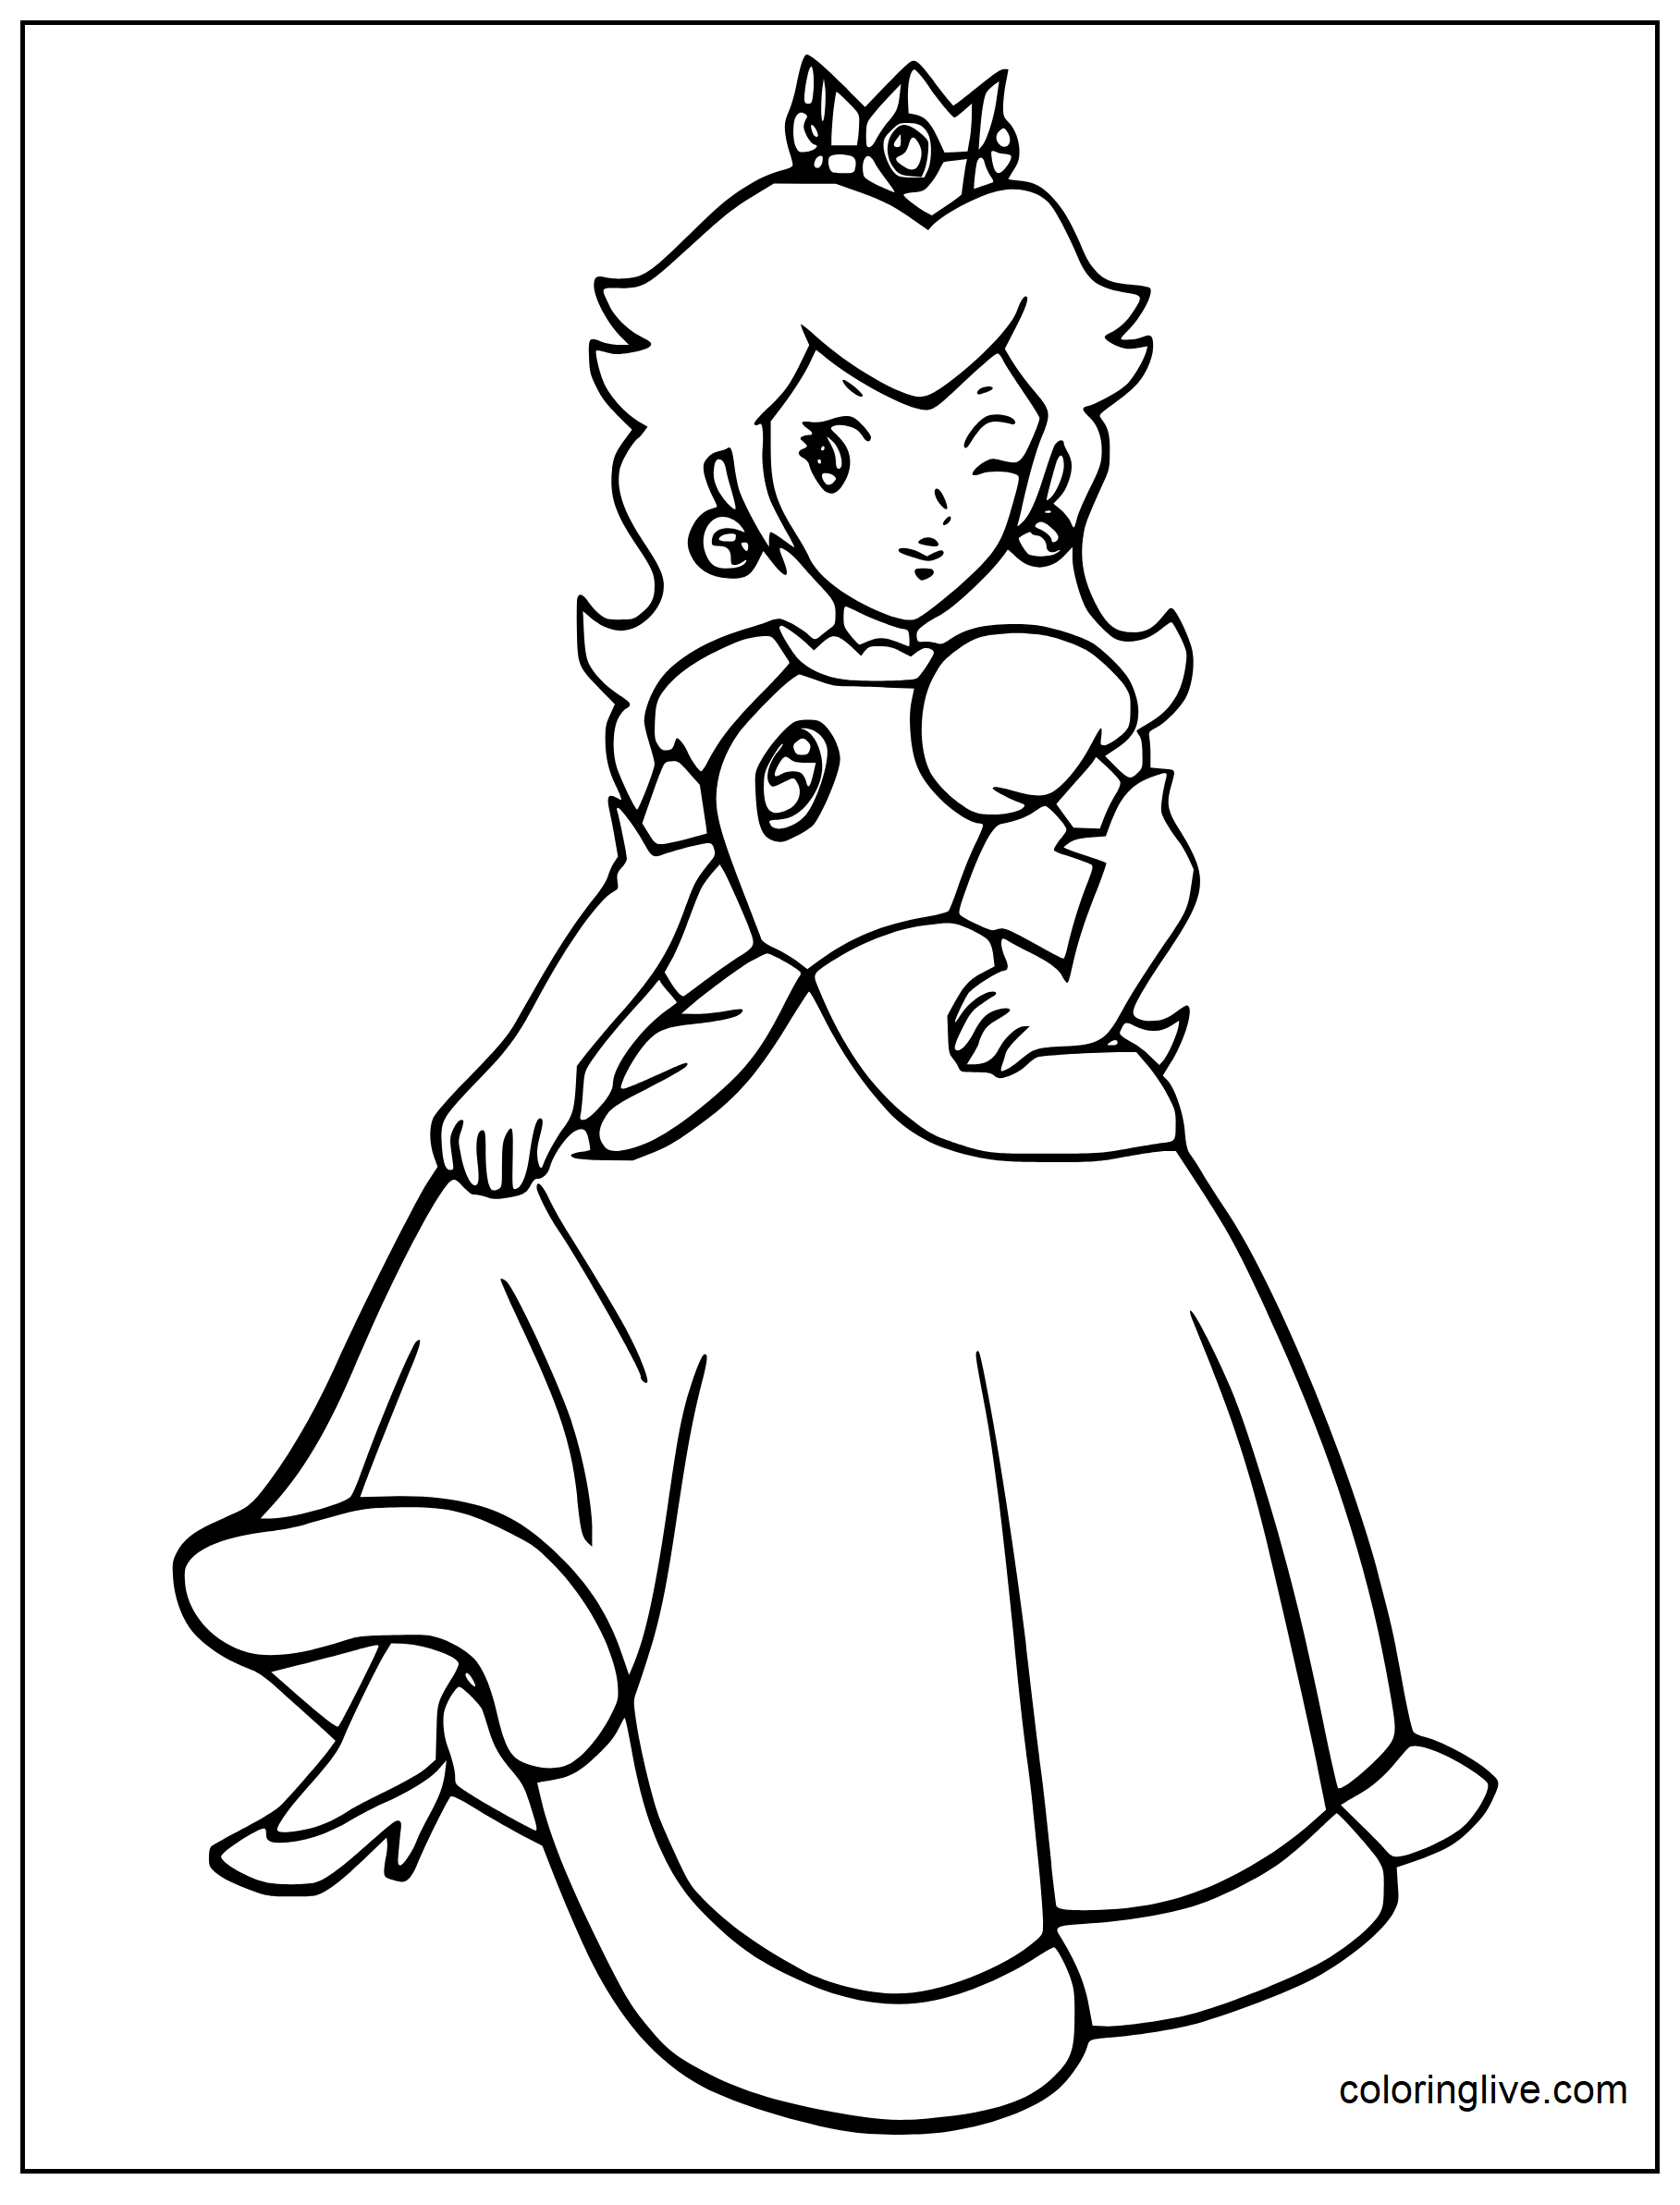 Printable Pretty Princess Peach Coloring Page for kids.